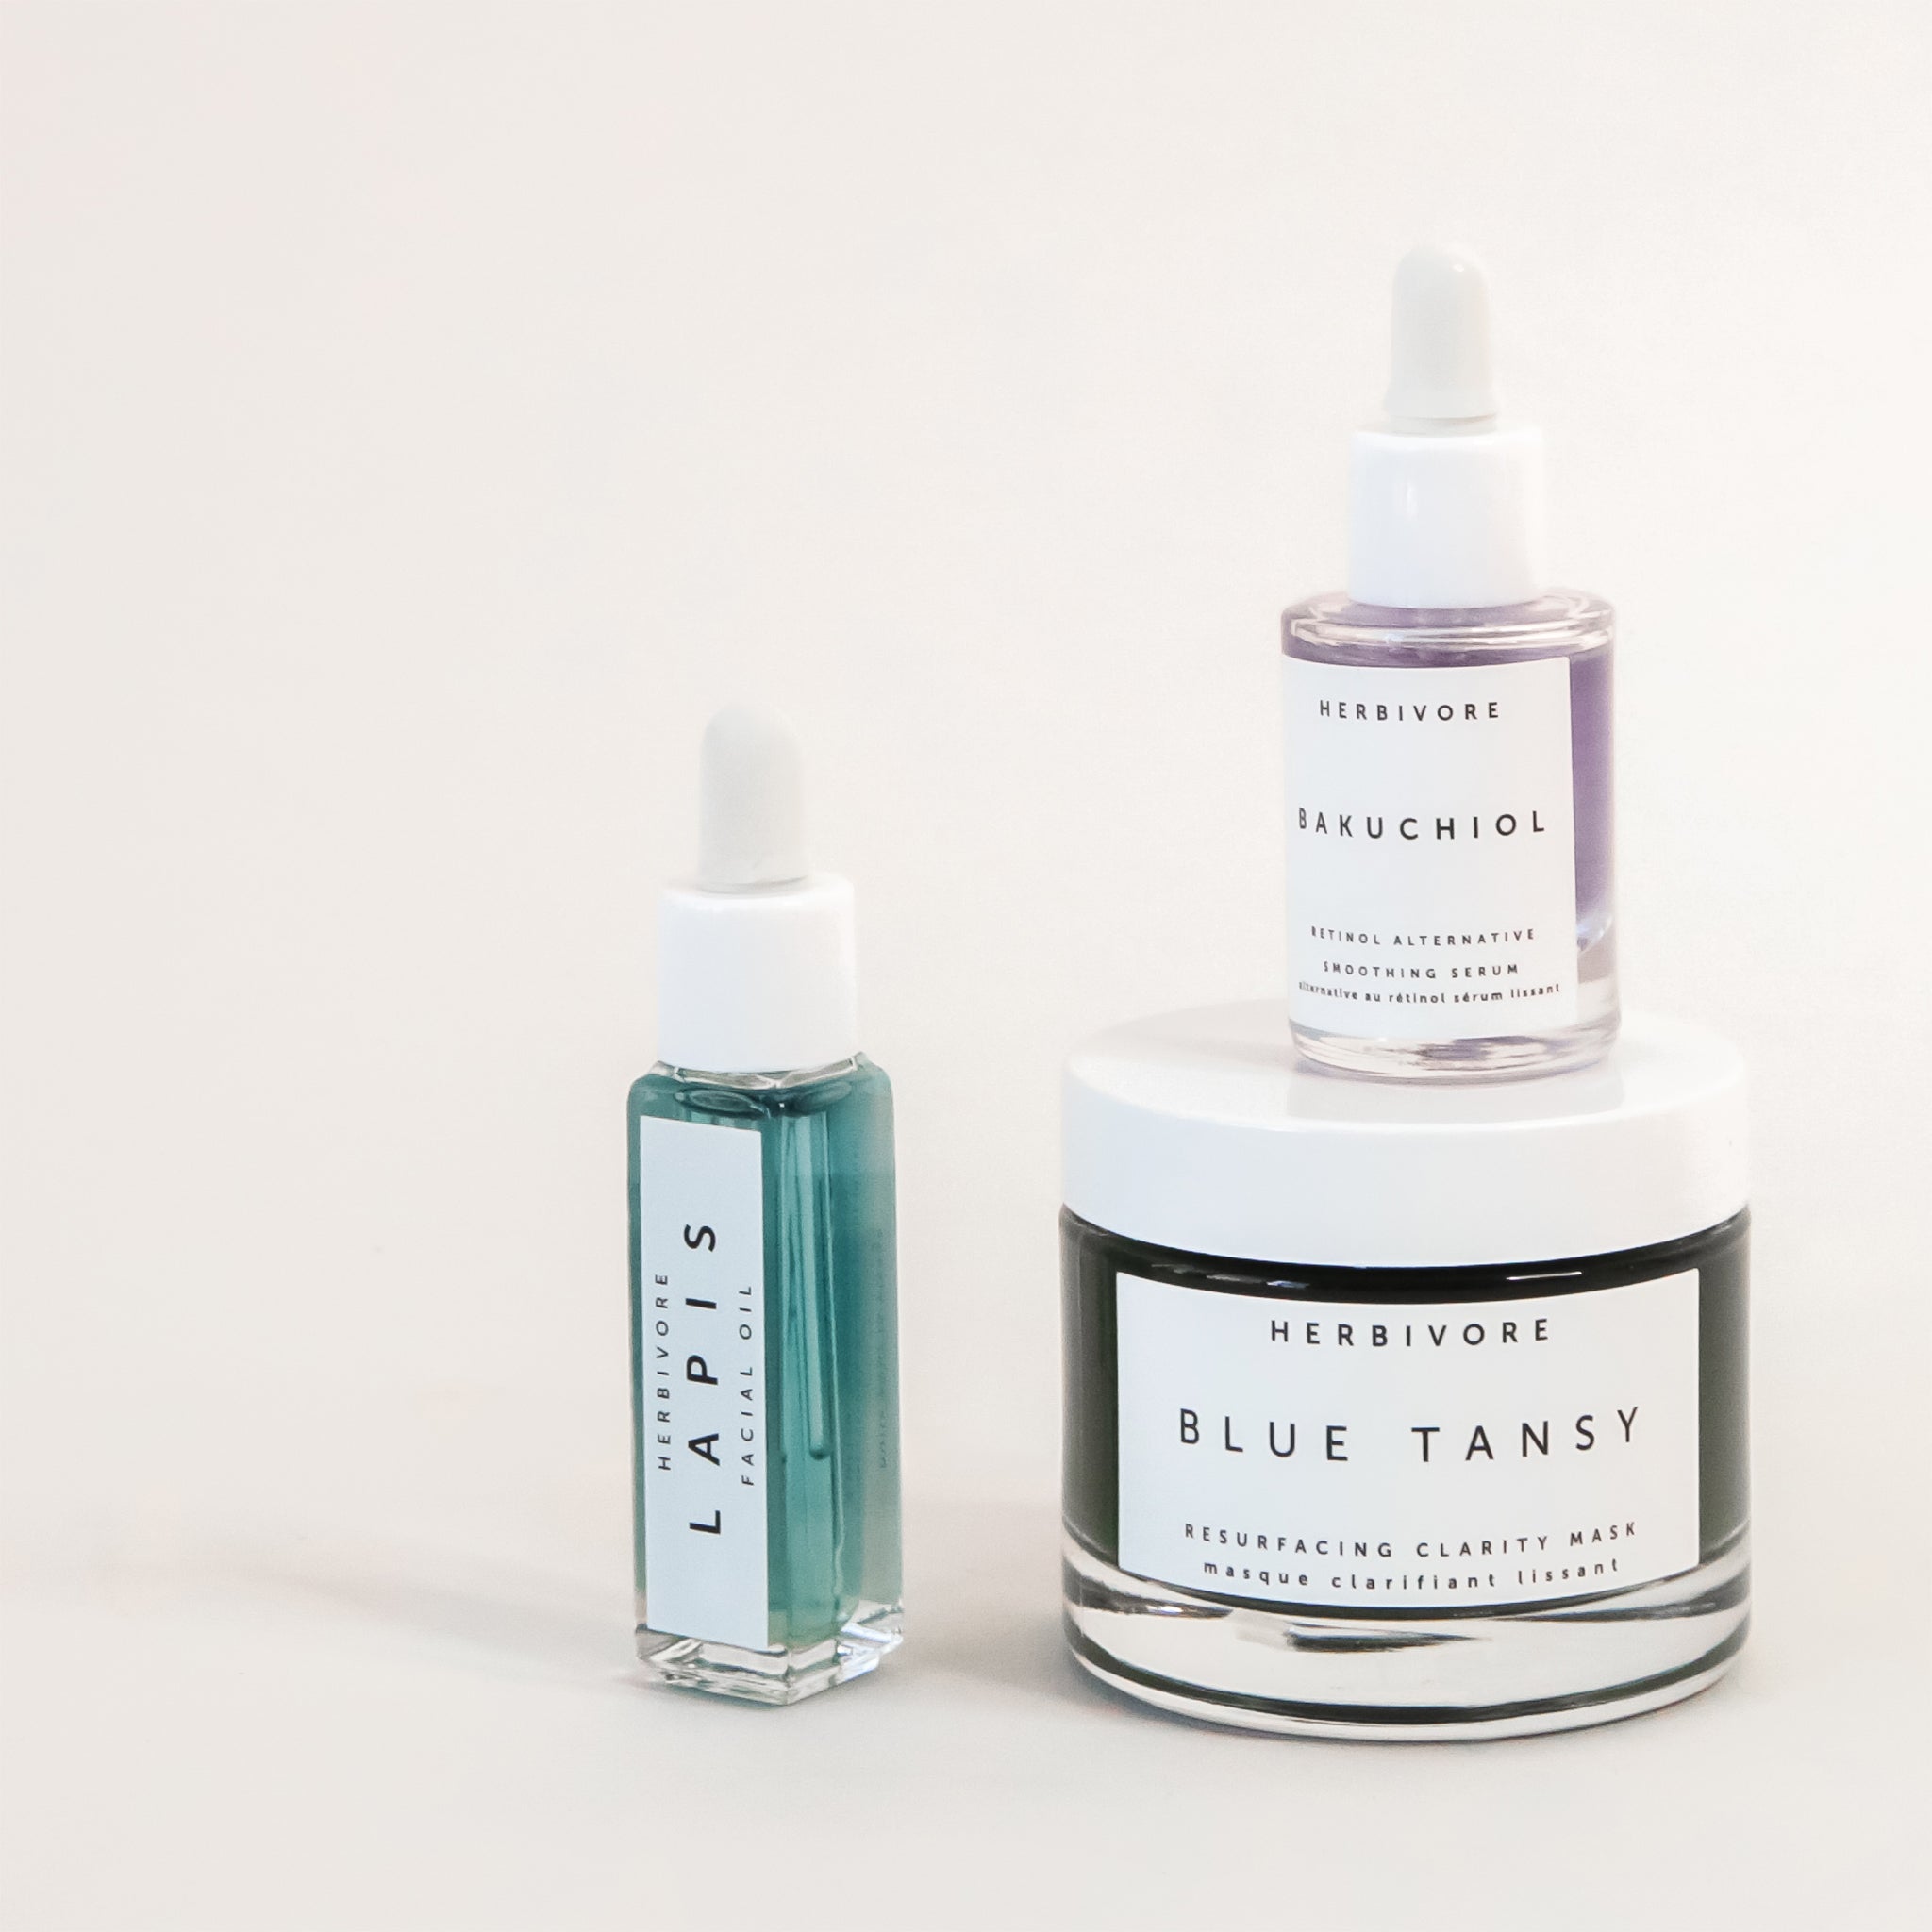 product shot of herbivore's lapis facial oil, bakuchiol serum, and blue tansy mask all on a white ground